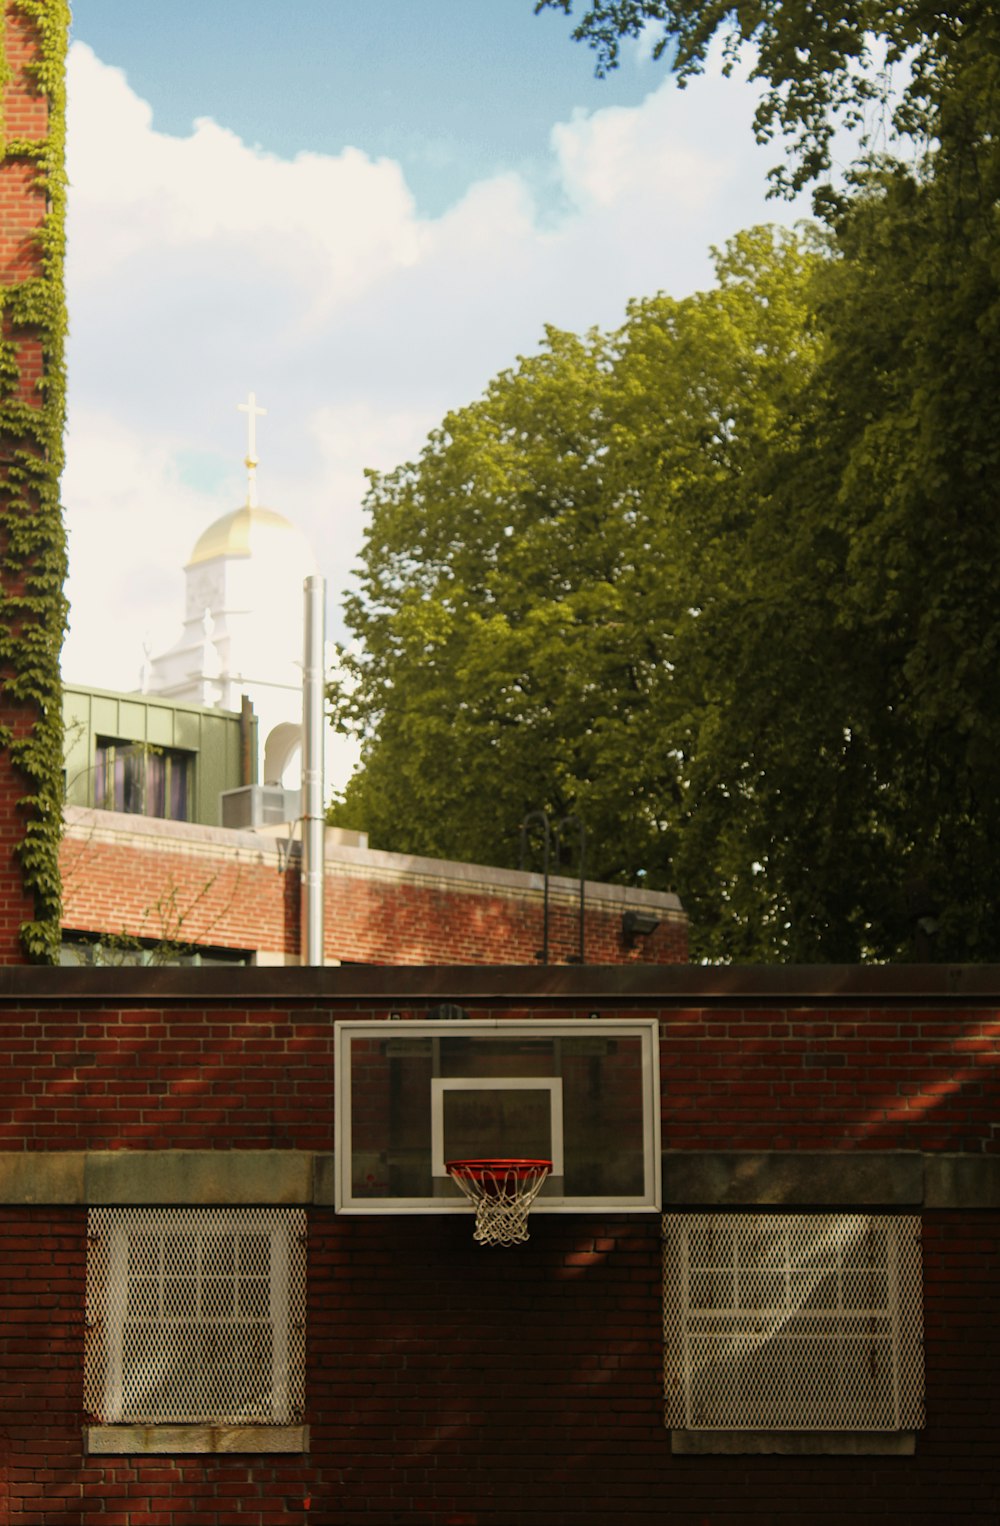 a basketball hoop hanging from the side of a brick building